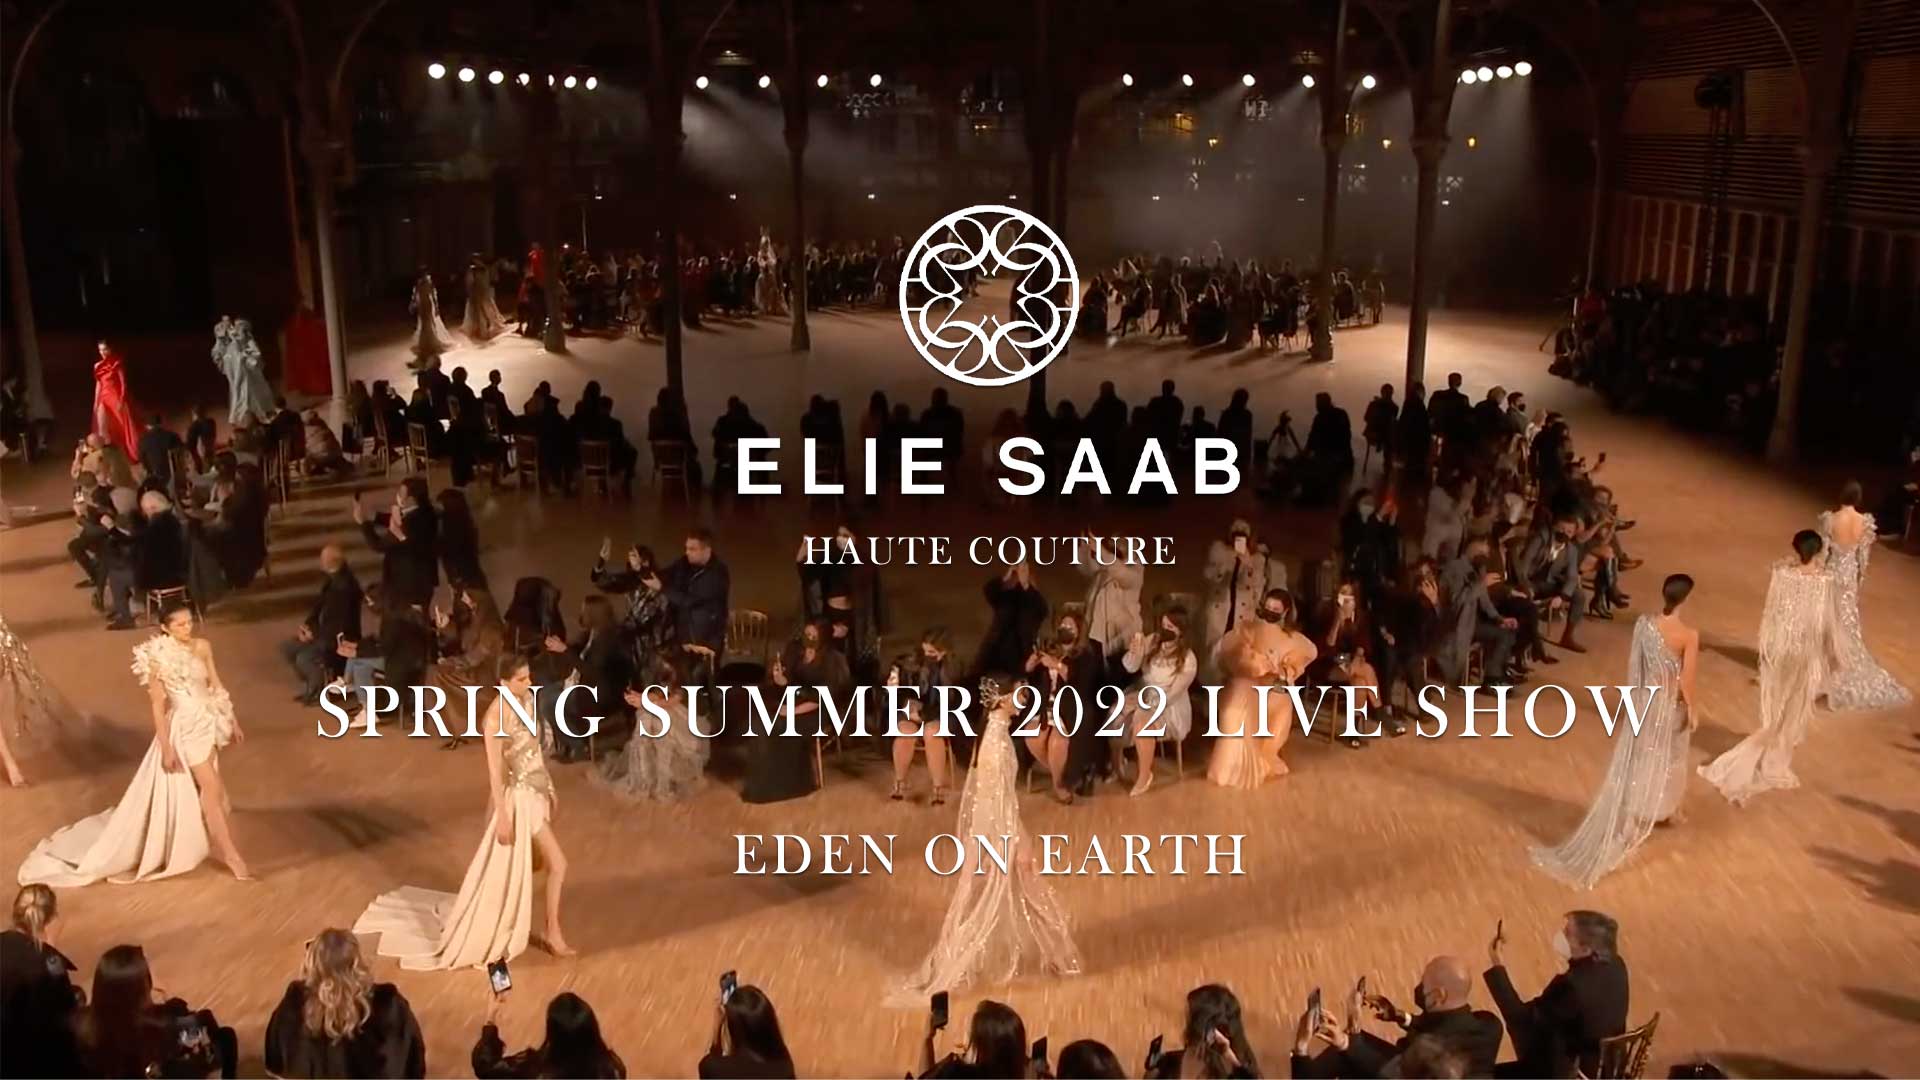 SPRING-SUMMER 2022 ELIE SAAB HAUTE COUTURE COLLECTION